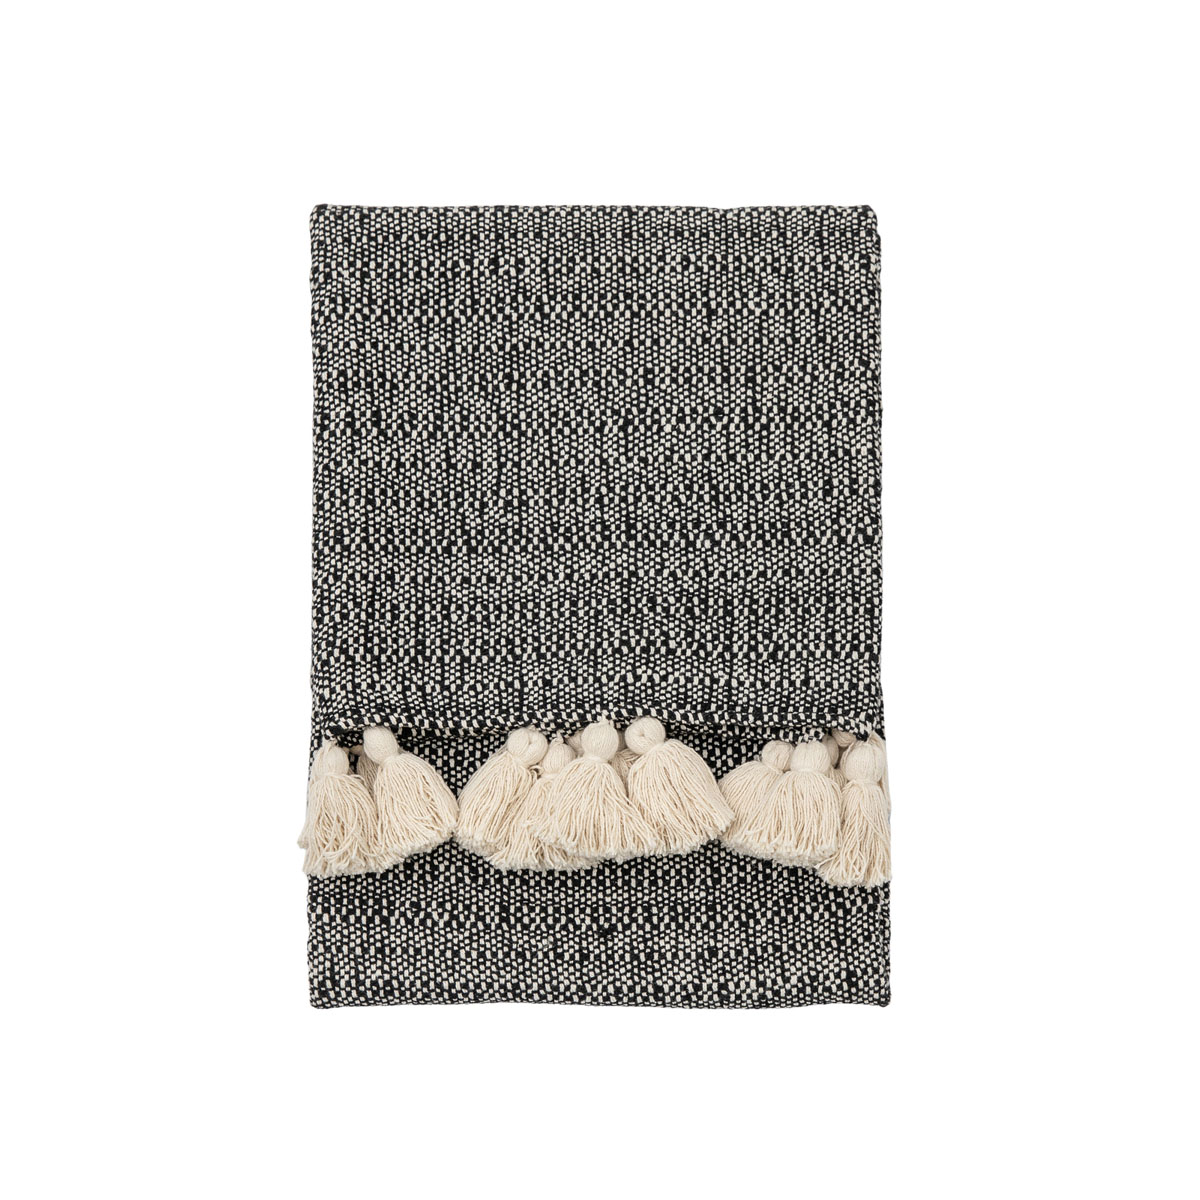 Woven Throw with Tassels Black 1300x1700mm